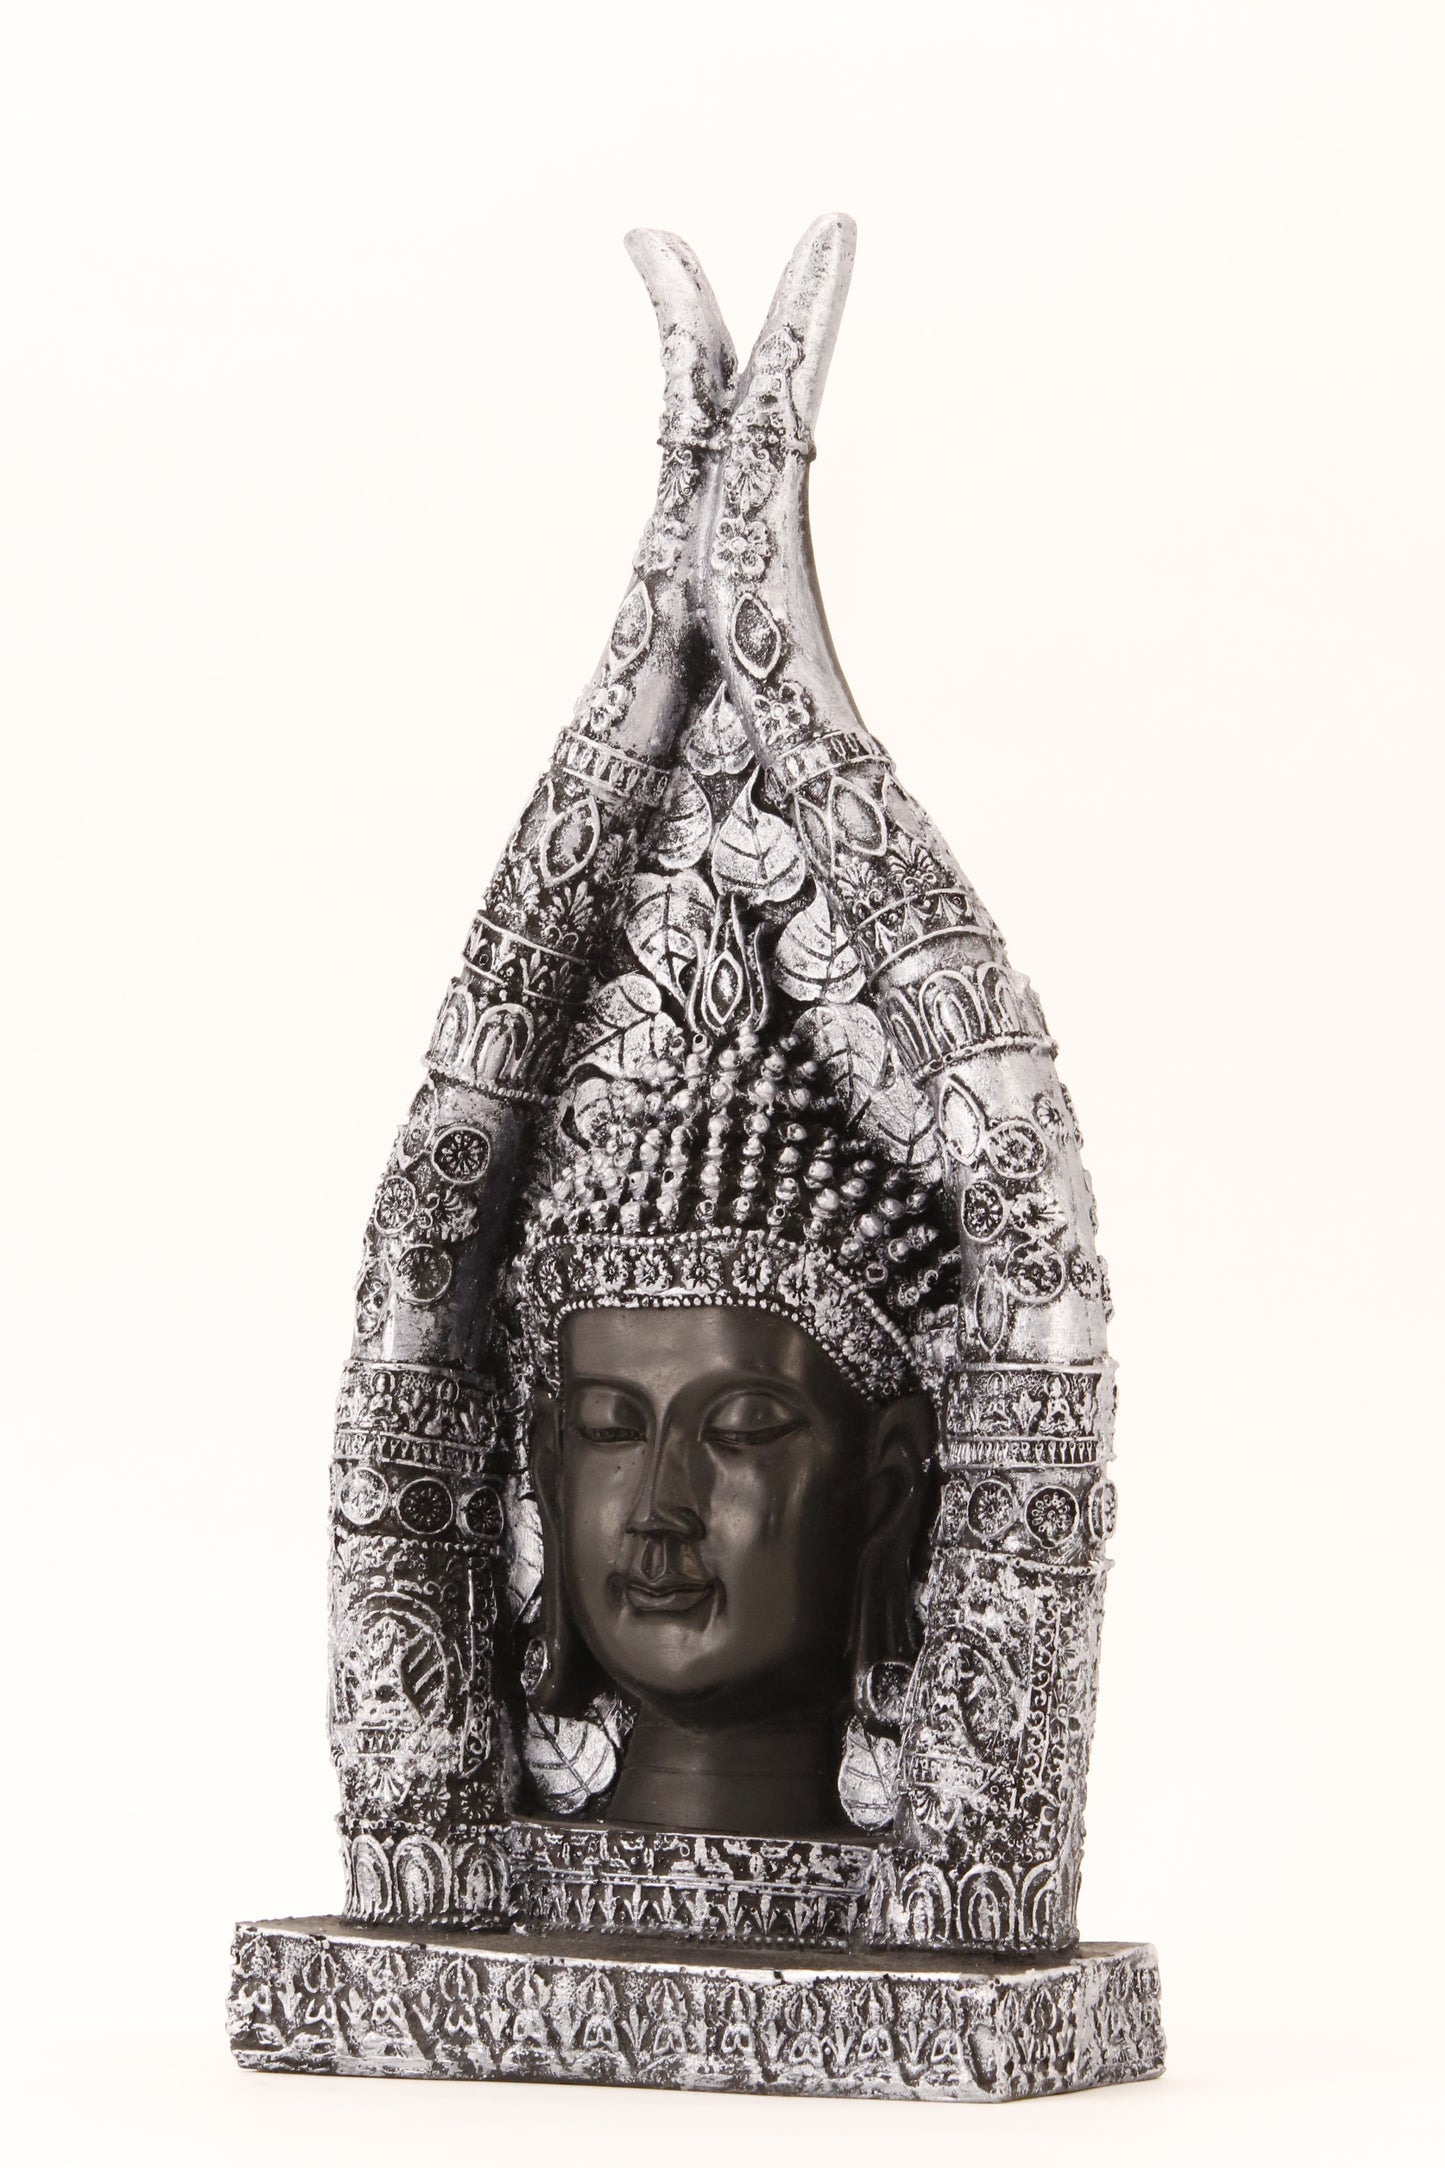 BUDDHA BUST SILVER ACCENT STATUE SIDE VIEW